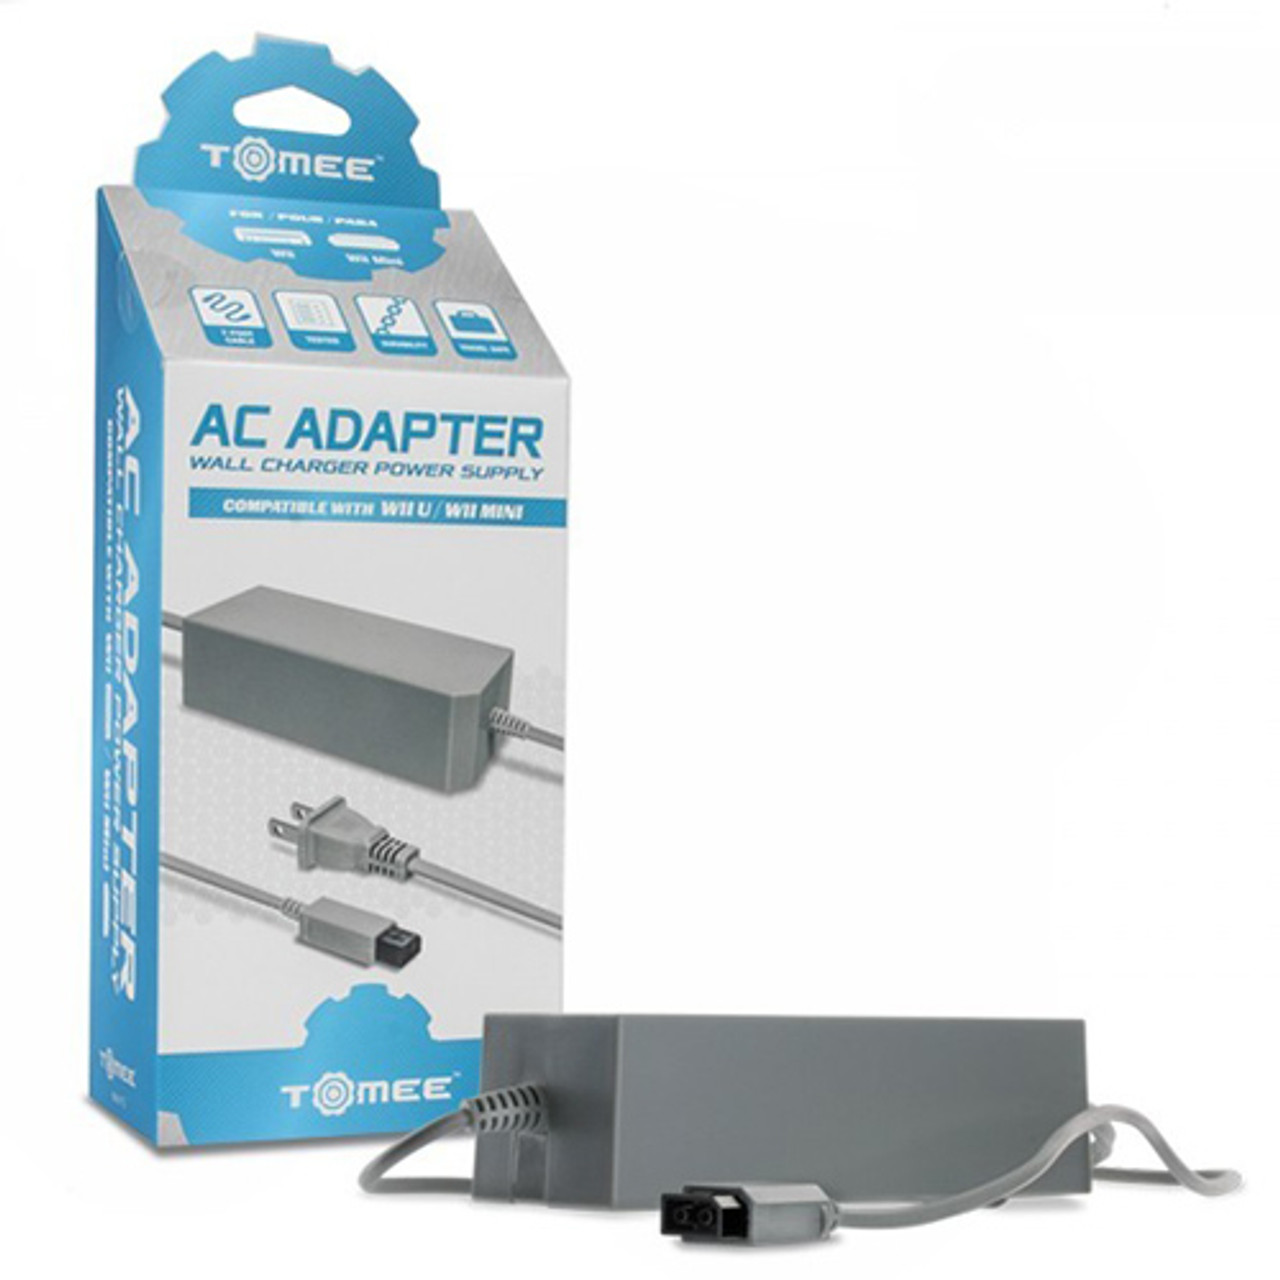 Wii AC Adapter - Tomee (W4)